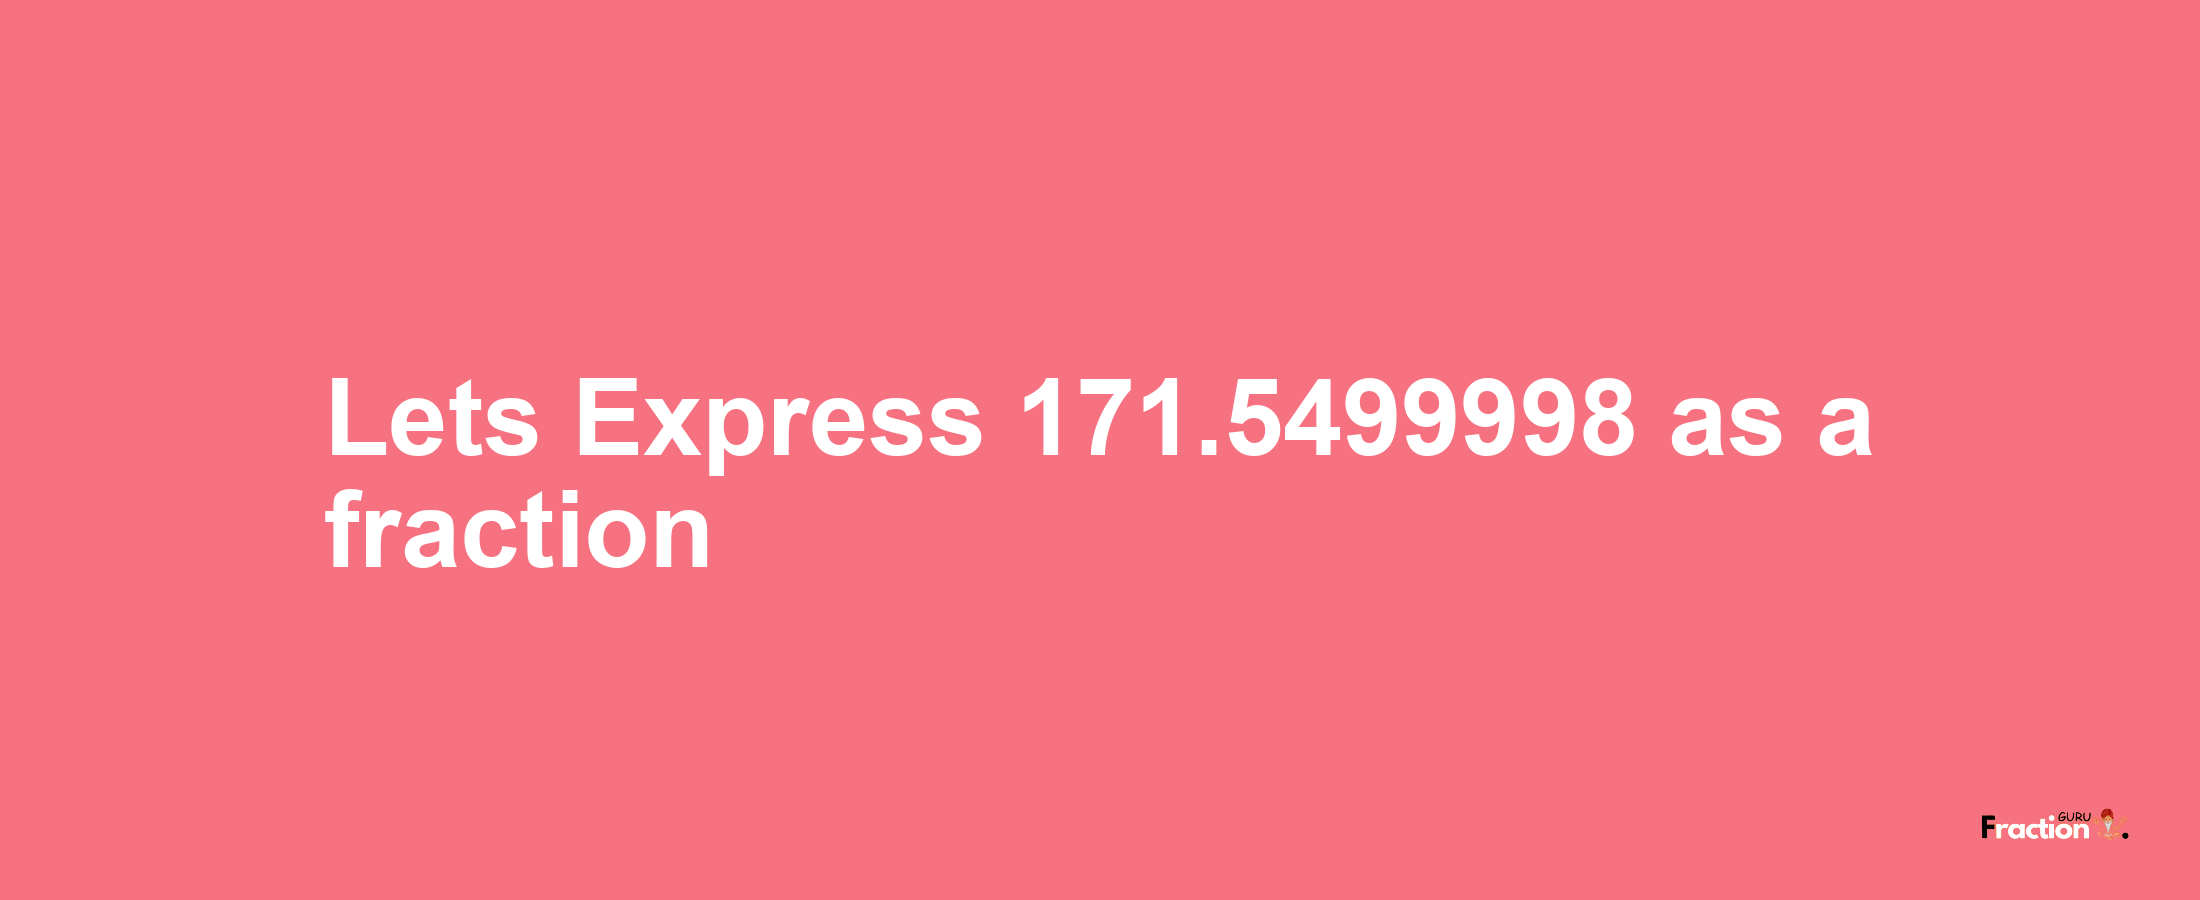 Lets Express 171.5499998 as afraction